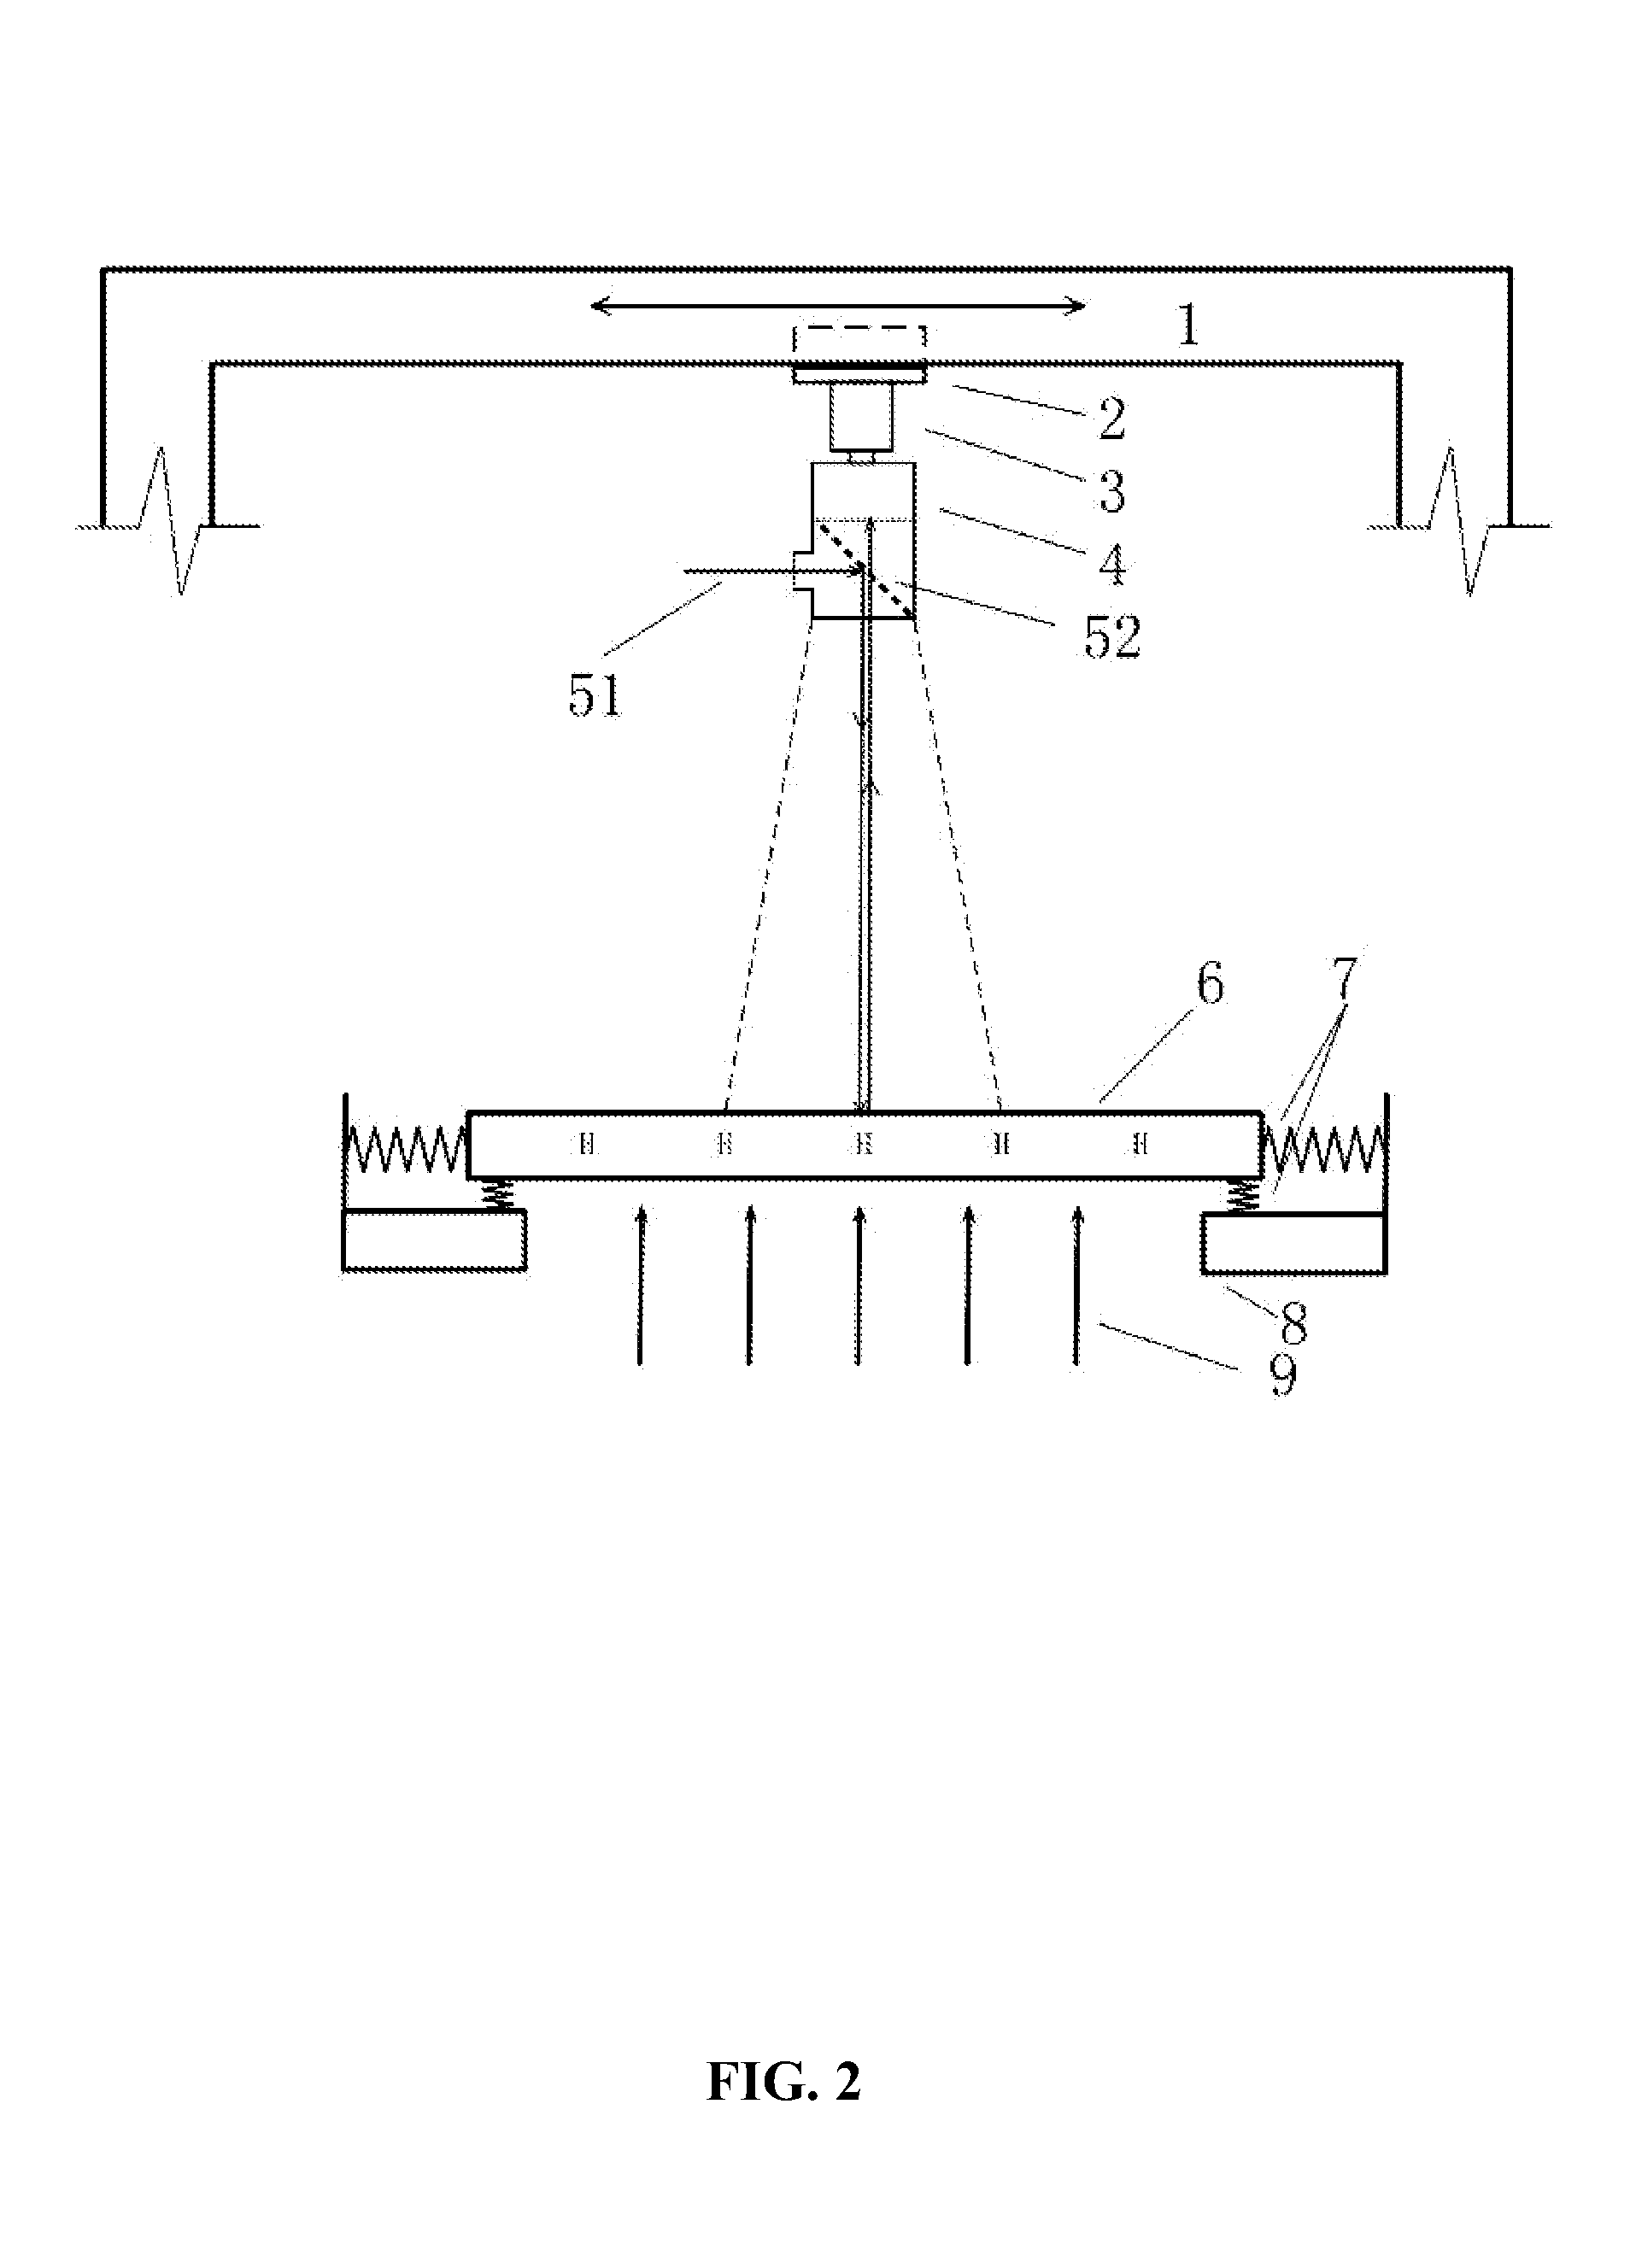 Device for detecting quality level of microelectronic packaging samples using photo-thermal imaging